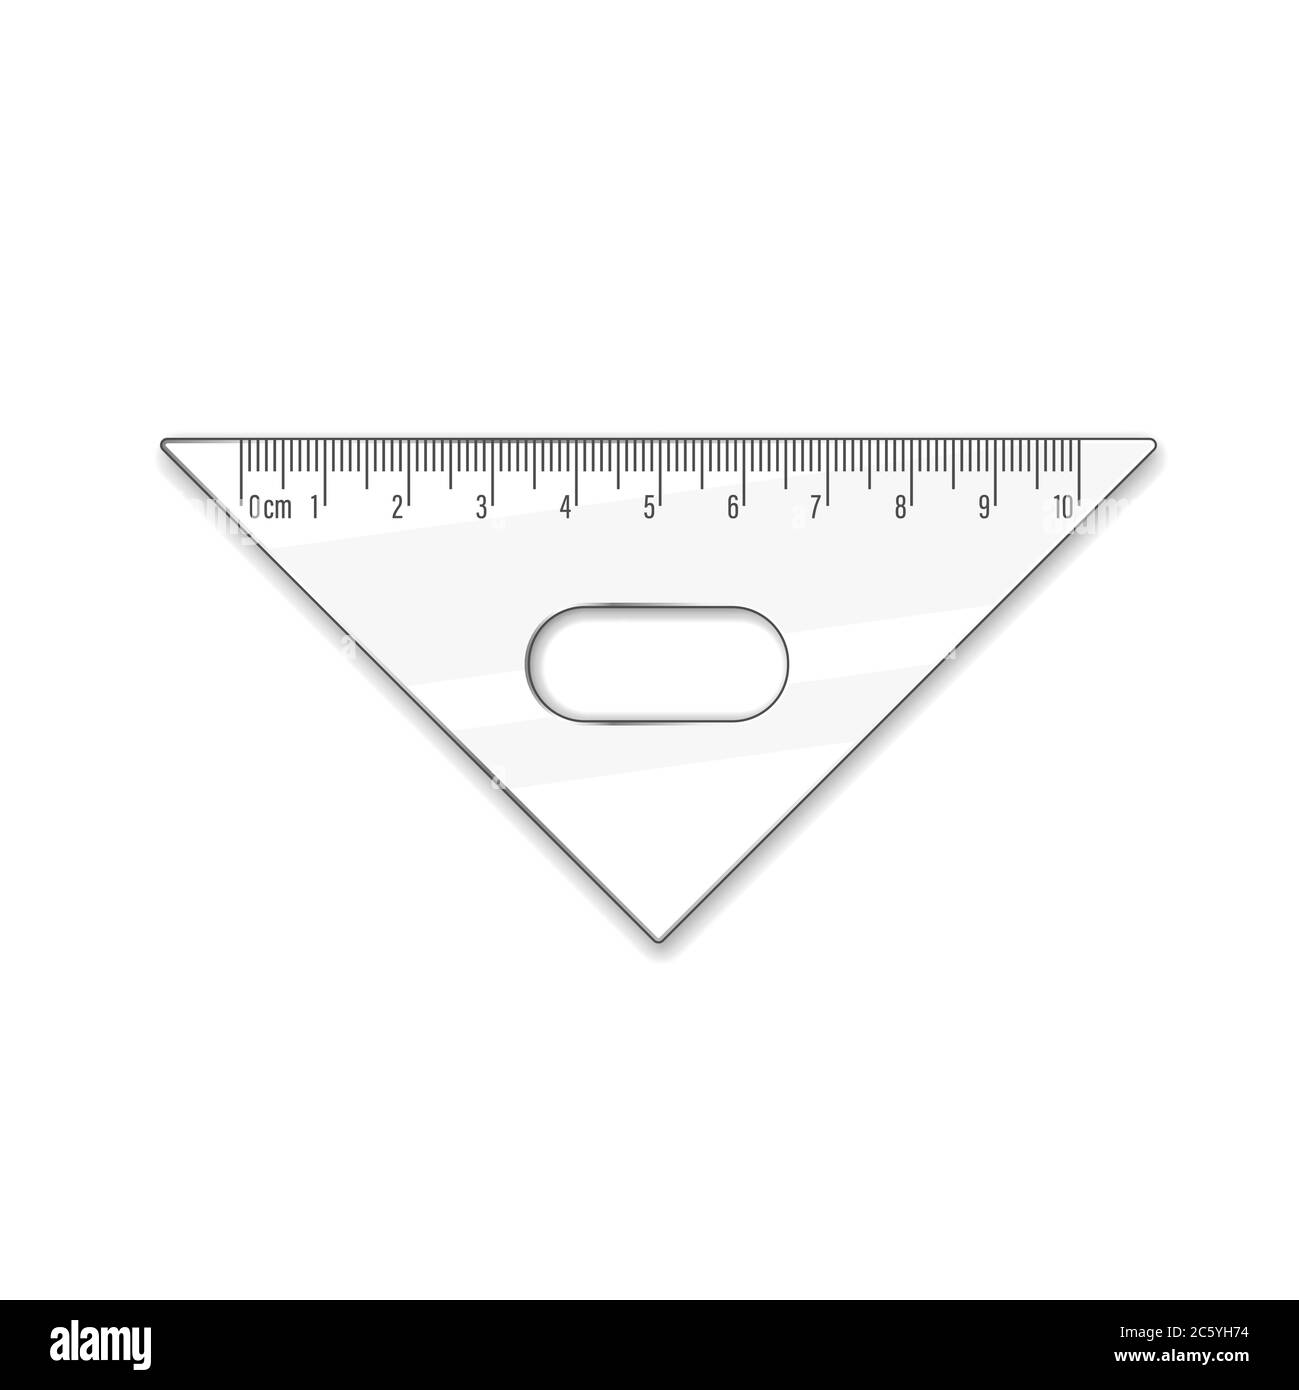 An Image Of A Ruler For Drawing With A Centimeter Scale Depicted In Various  Foreshortening. Also Shown Is A Graphic Illustration Of The Pyramid.  Royalty Free SVG, Cliparts, Vectors, and Stock Illustration.